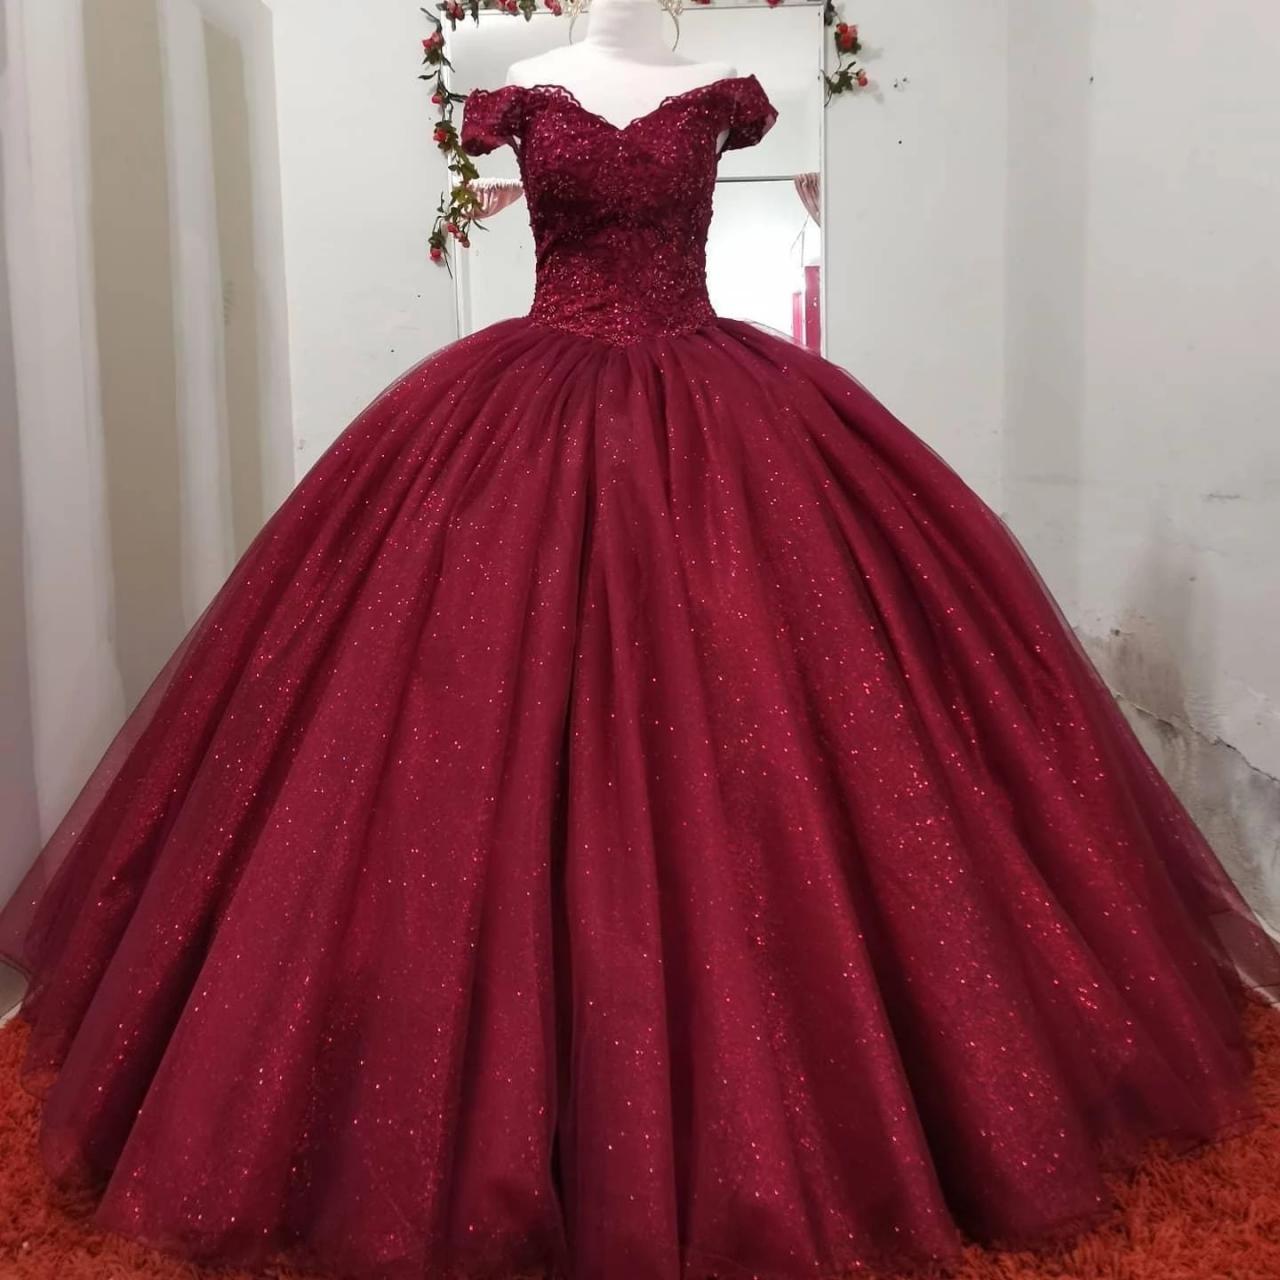 Sparkly Burgundy Quinceanera Dresses Fashion Appliques Tulle Formal Princess 15 Party Birthday Gowns Robe De Bal